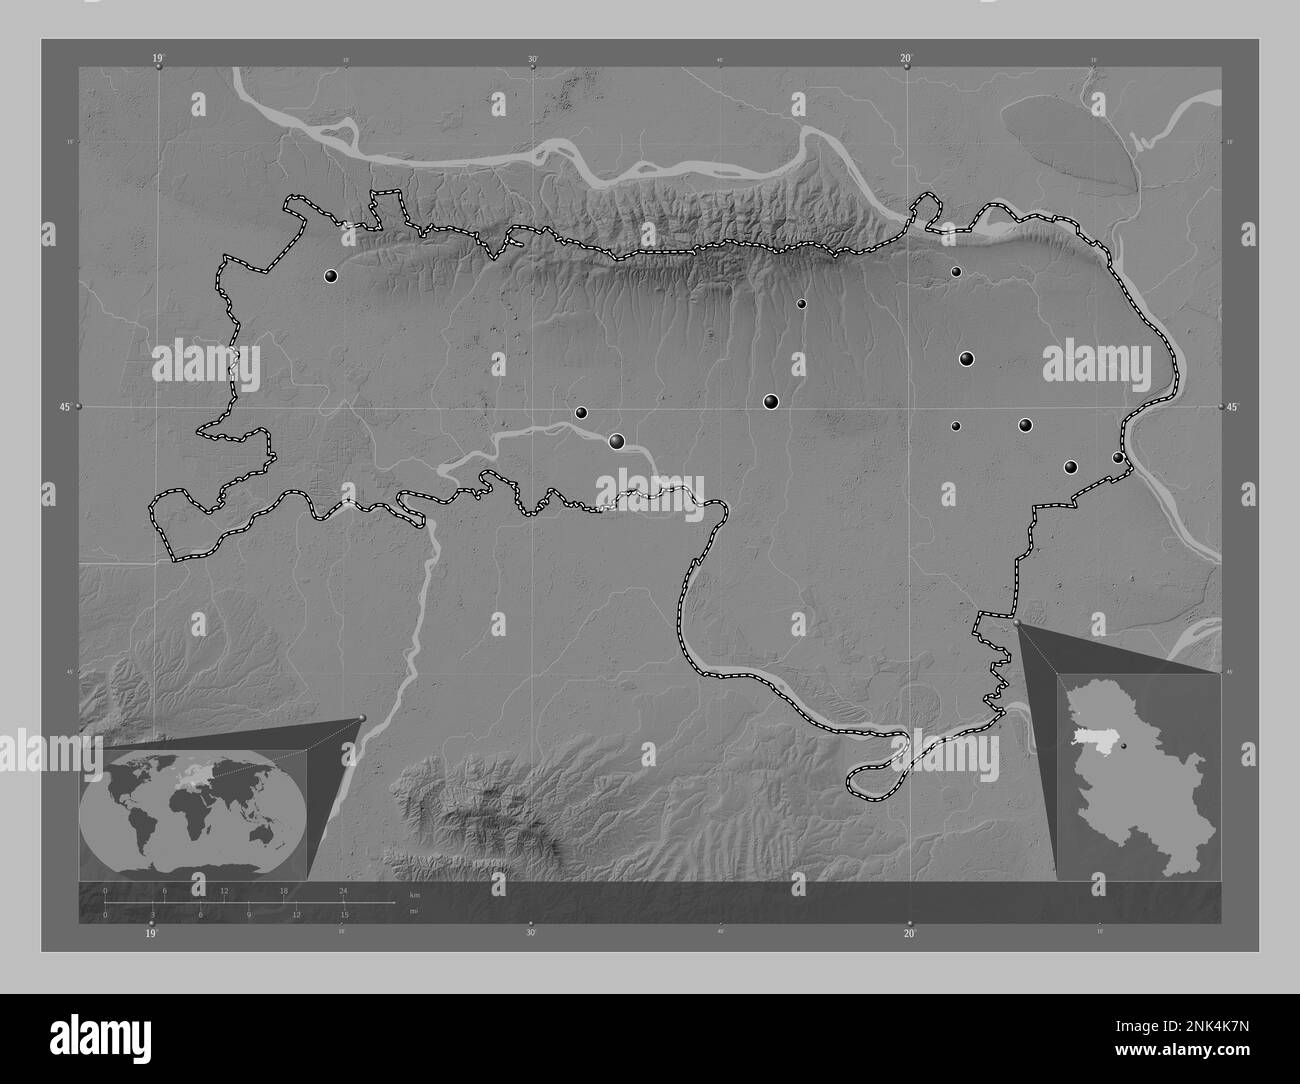 Sremski, district of Serbia. Grayscale elevation map with lakes and rivers. Locations of major cities of the region. Corner auxiliary location maps Stock Photo